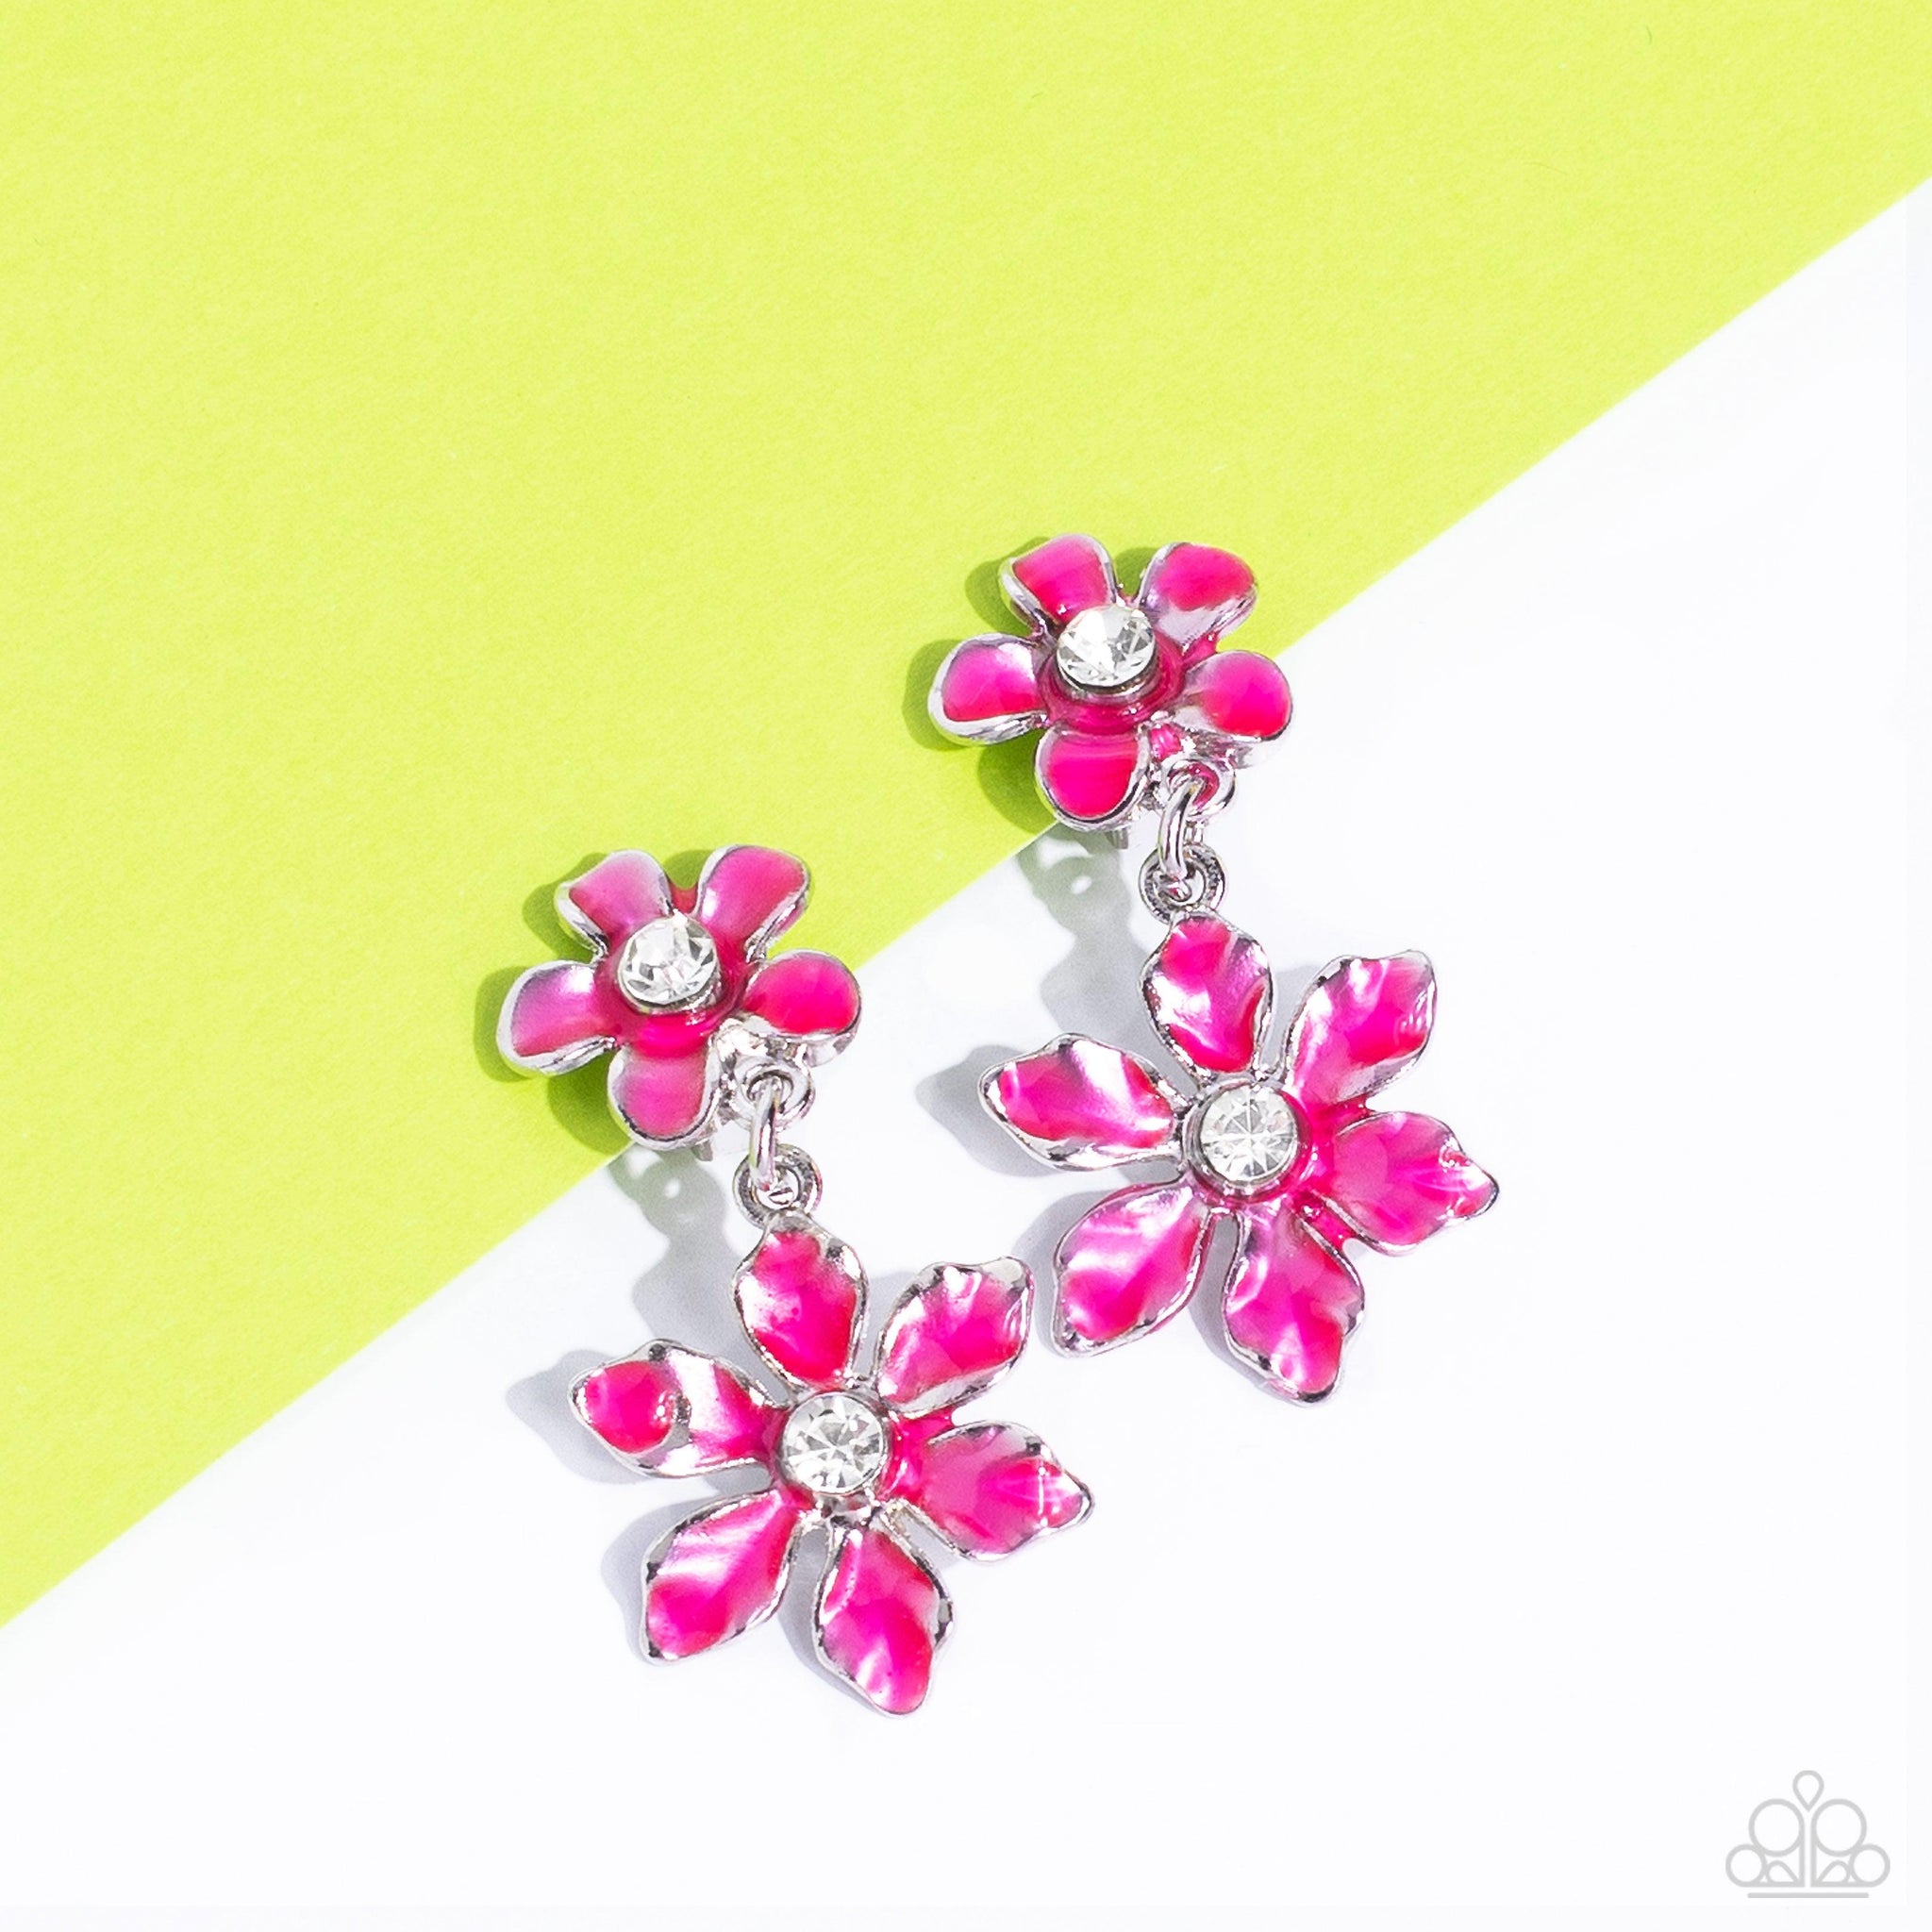  30-day stick-on Earring - Pink Poppy (S-4057)